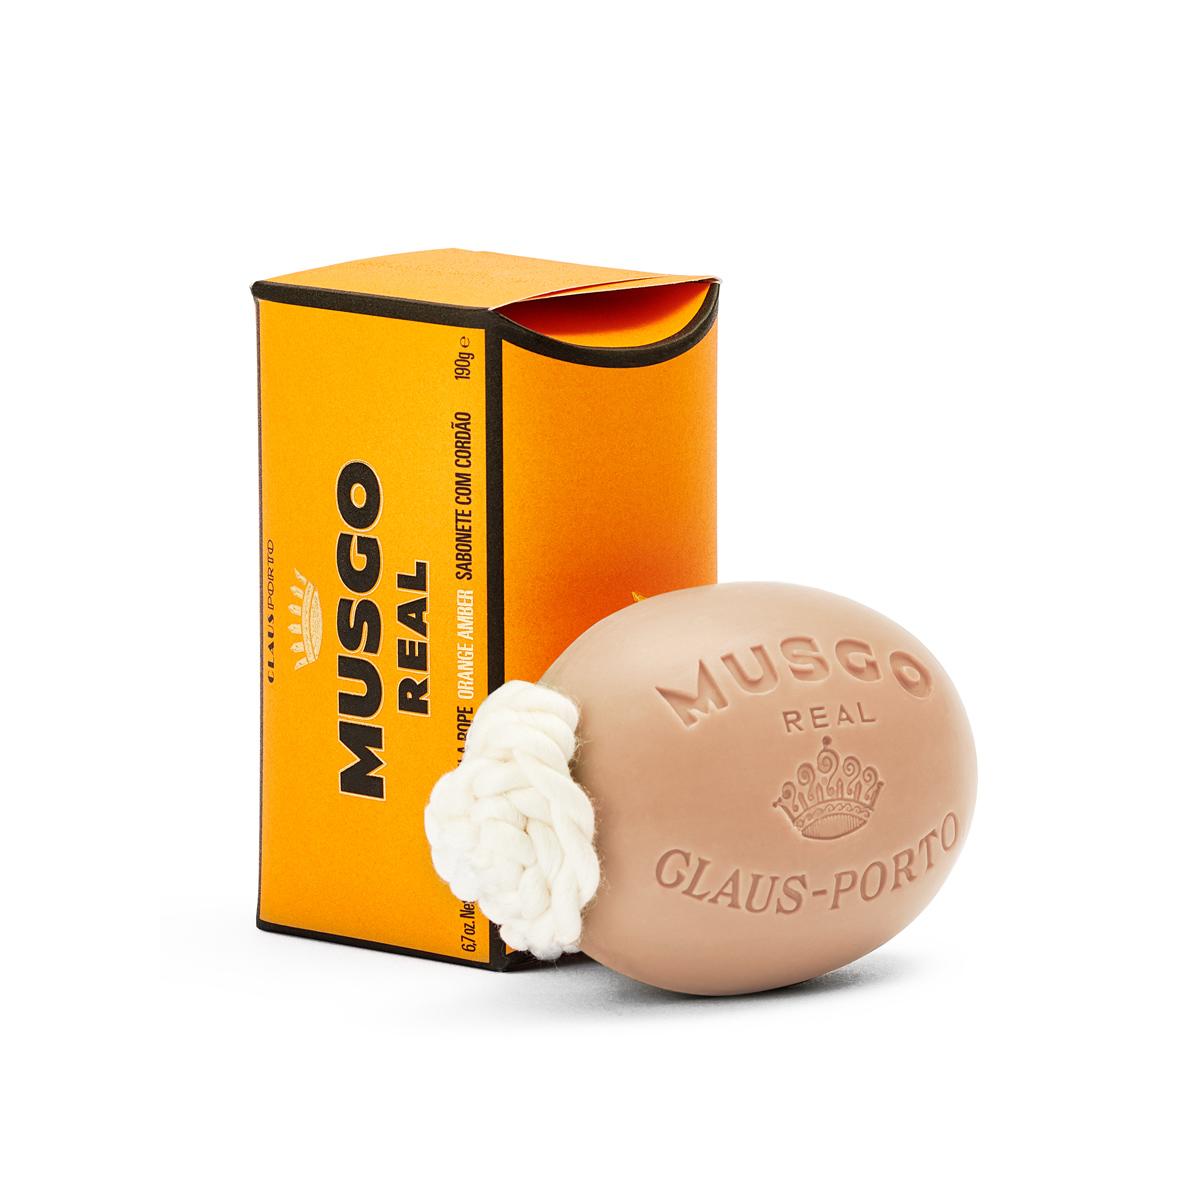 Musgo Real Soap on a Rope Orange Amber 190g